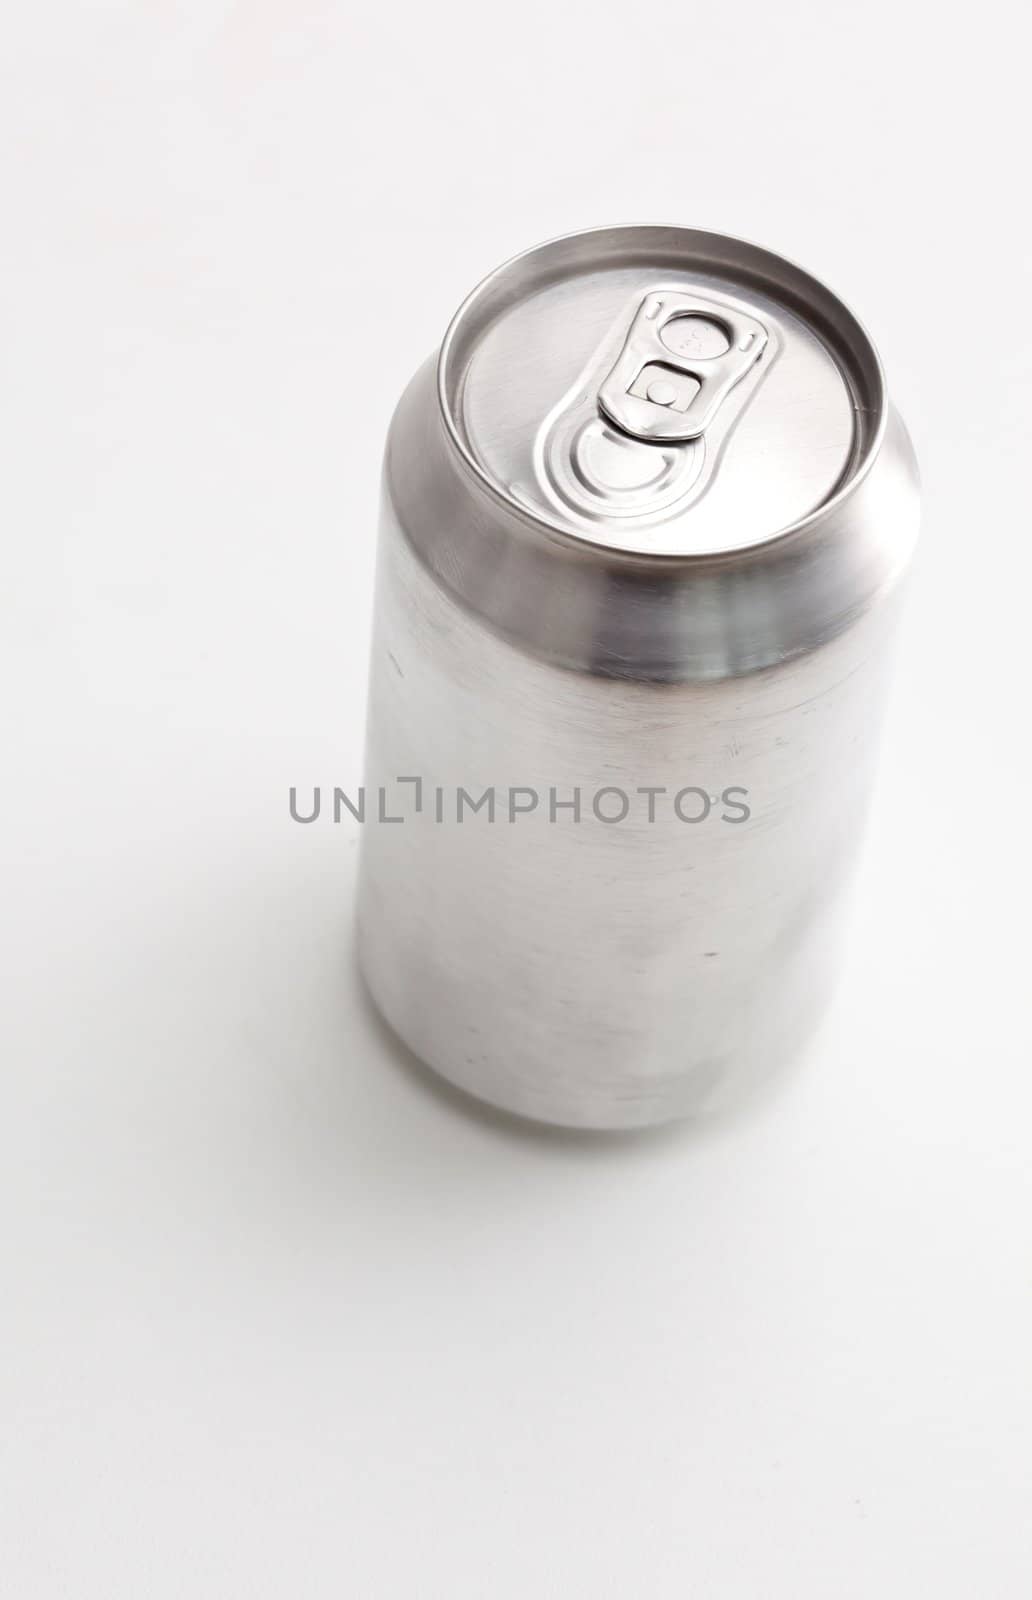 High angle view of a closed can against a white background